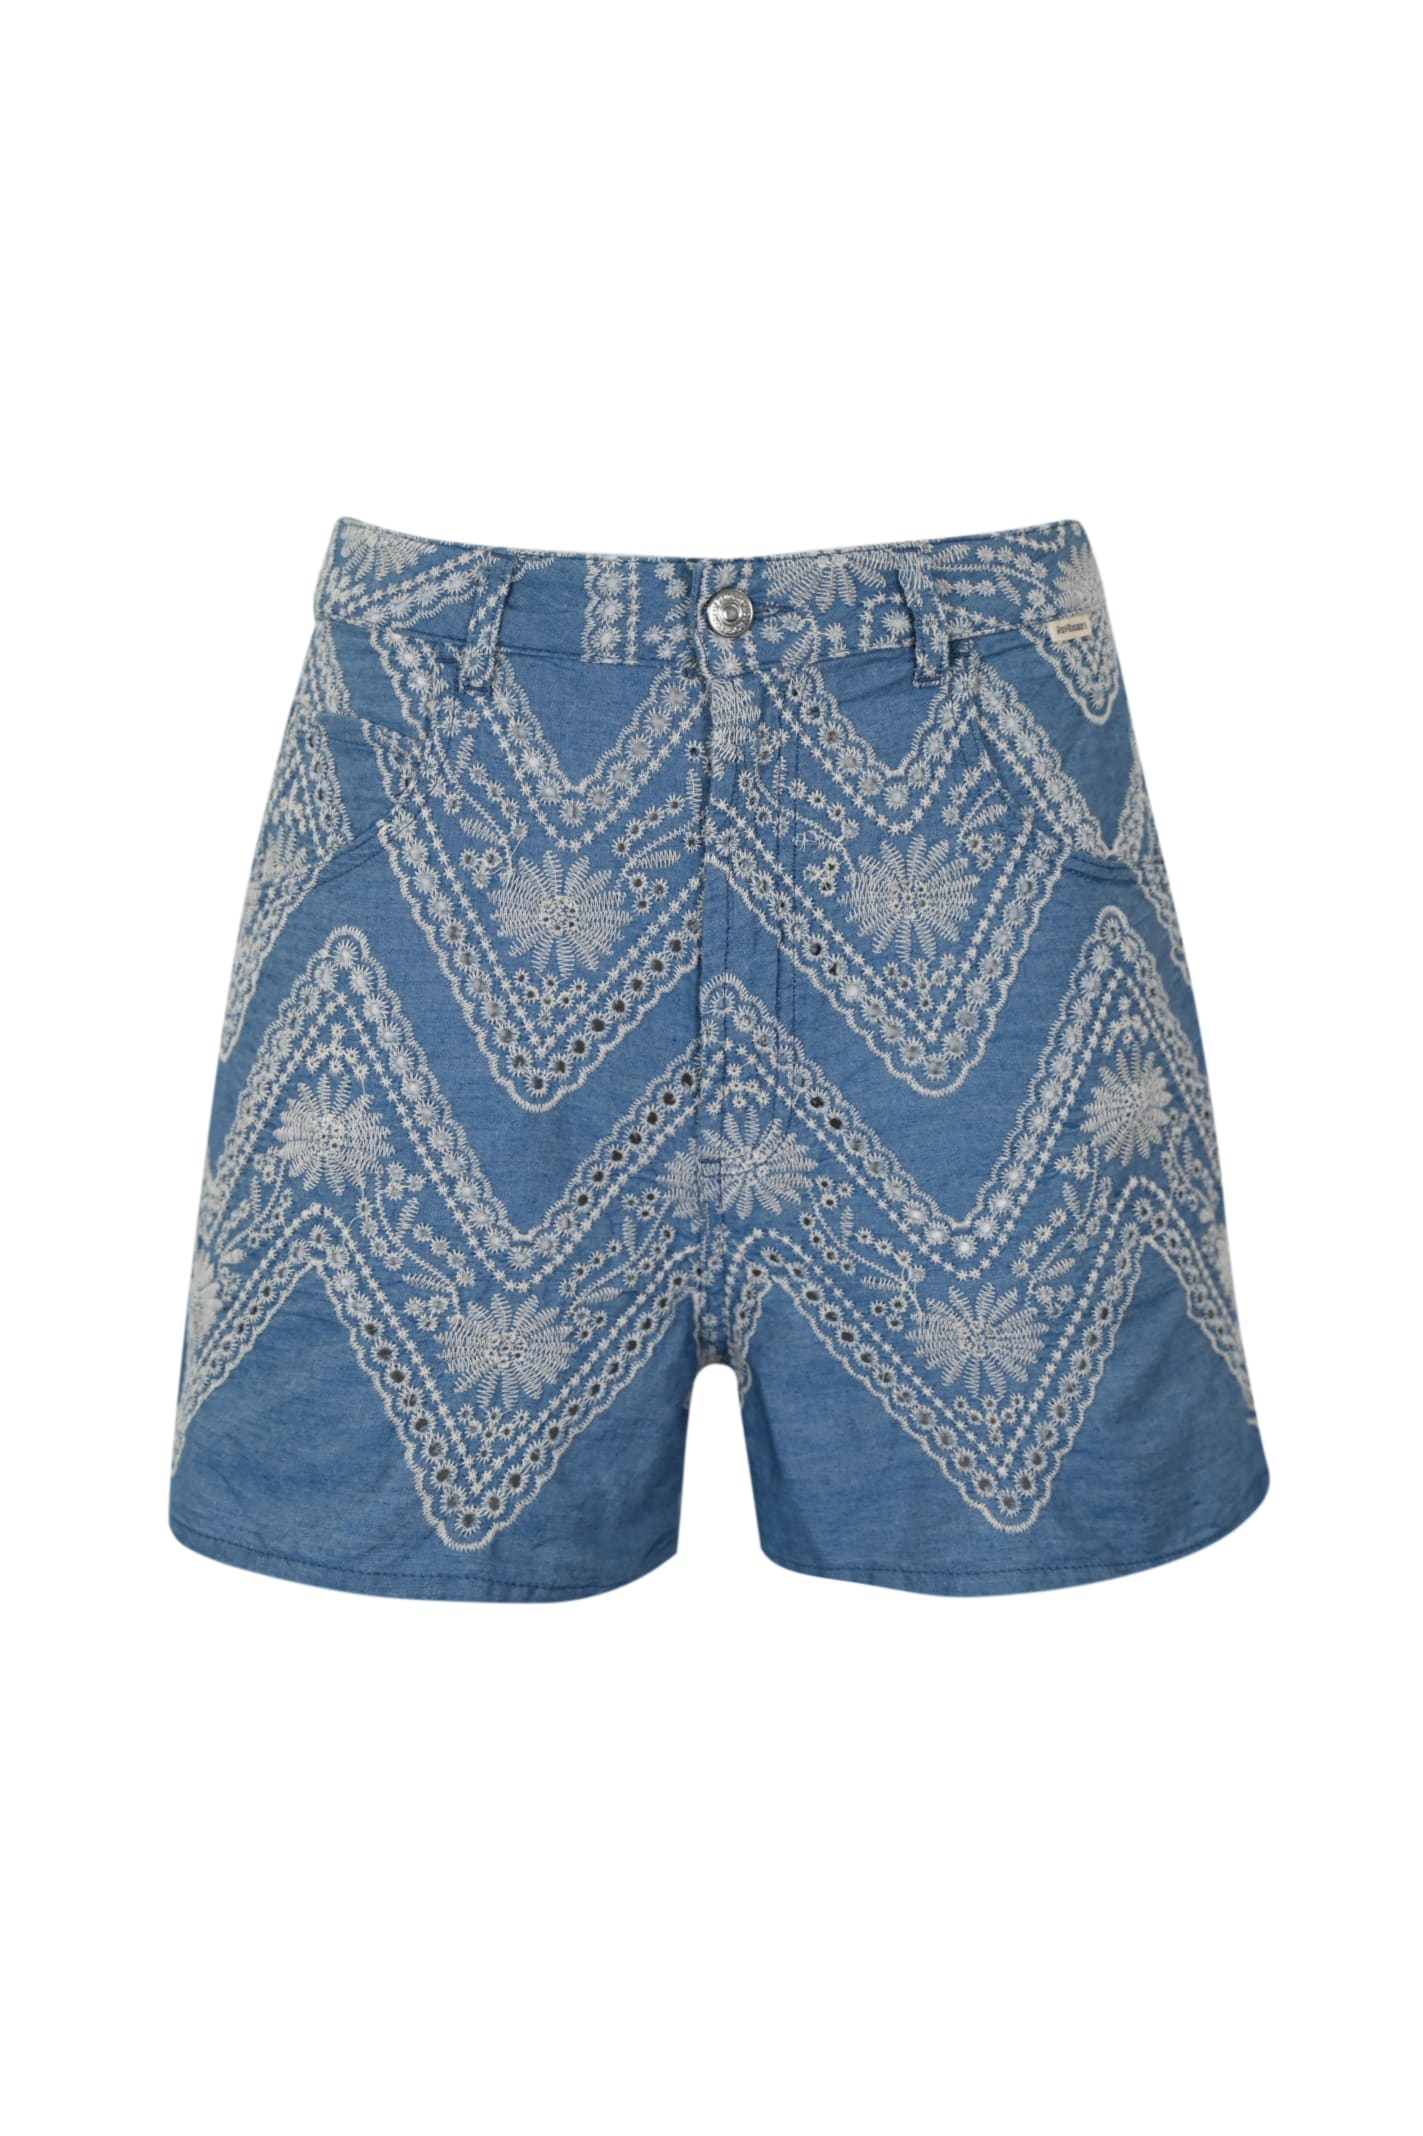 Roy Rogers Old Glory Chambray Embroidery Shorts In Washed Indigo